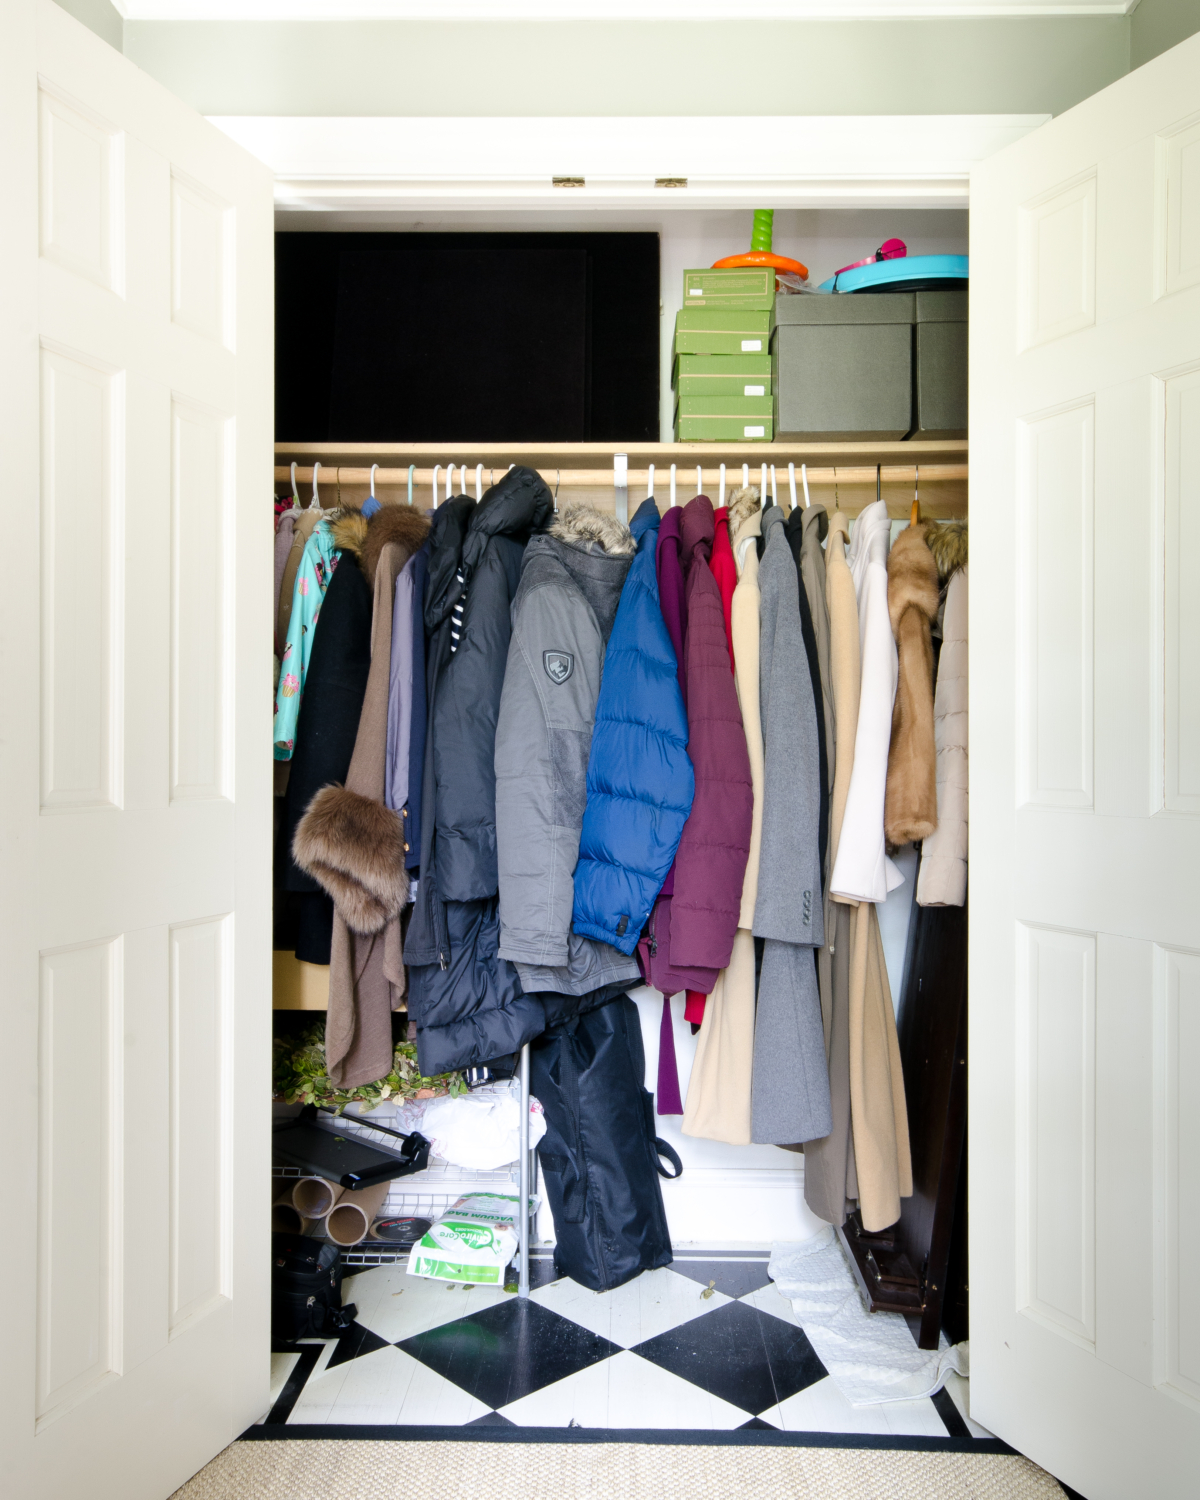 https://www.thechroniclesofhome.com/wp-content/uploads/2018/05/coat-closet-organization-1-1200x1500.jpg